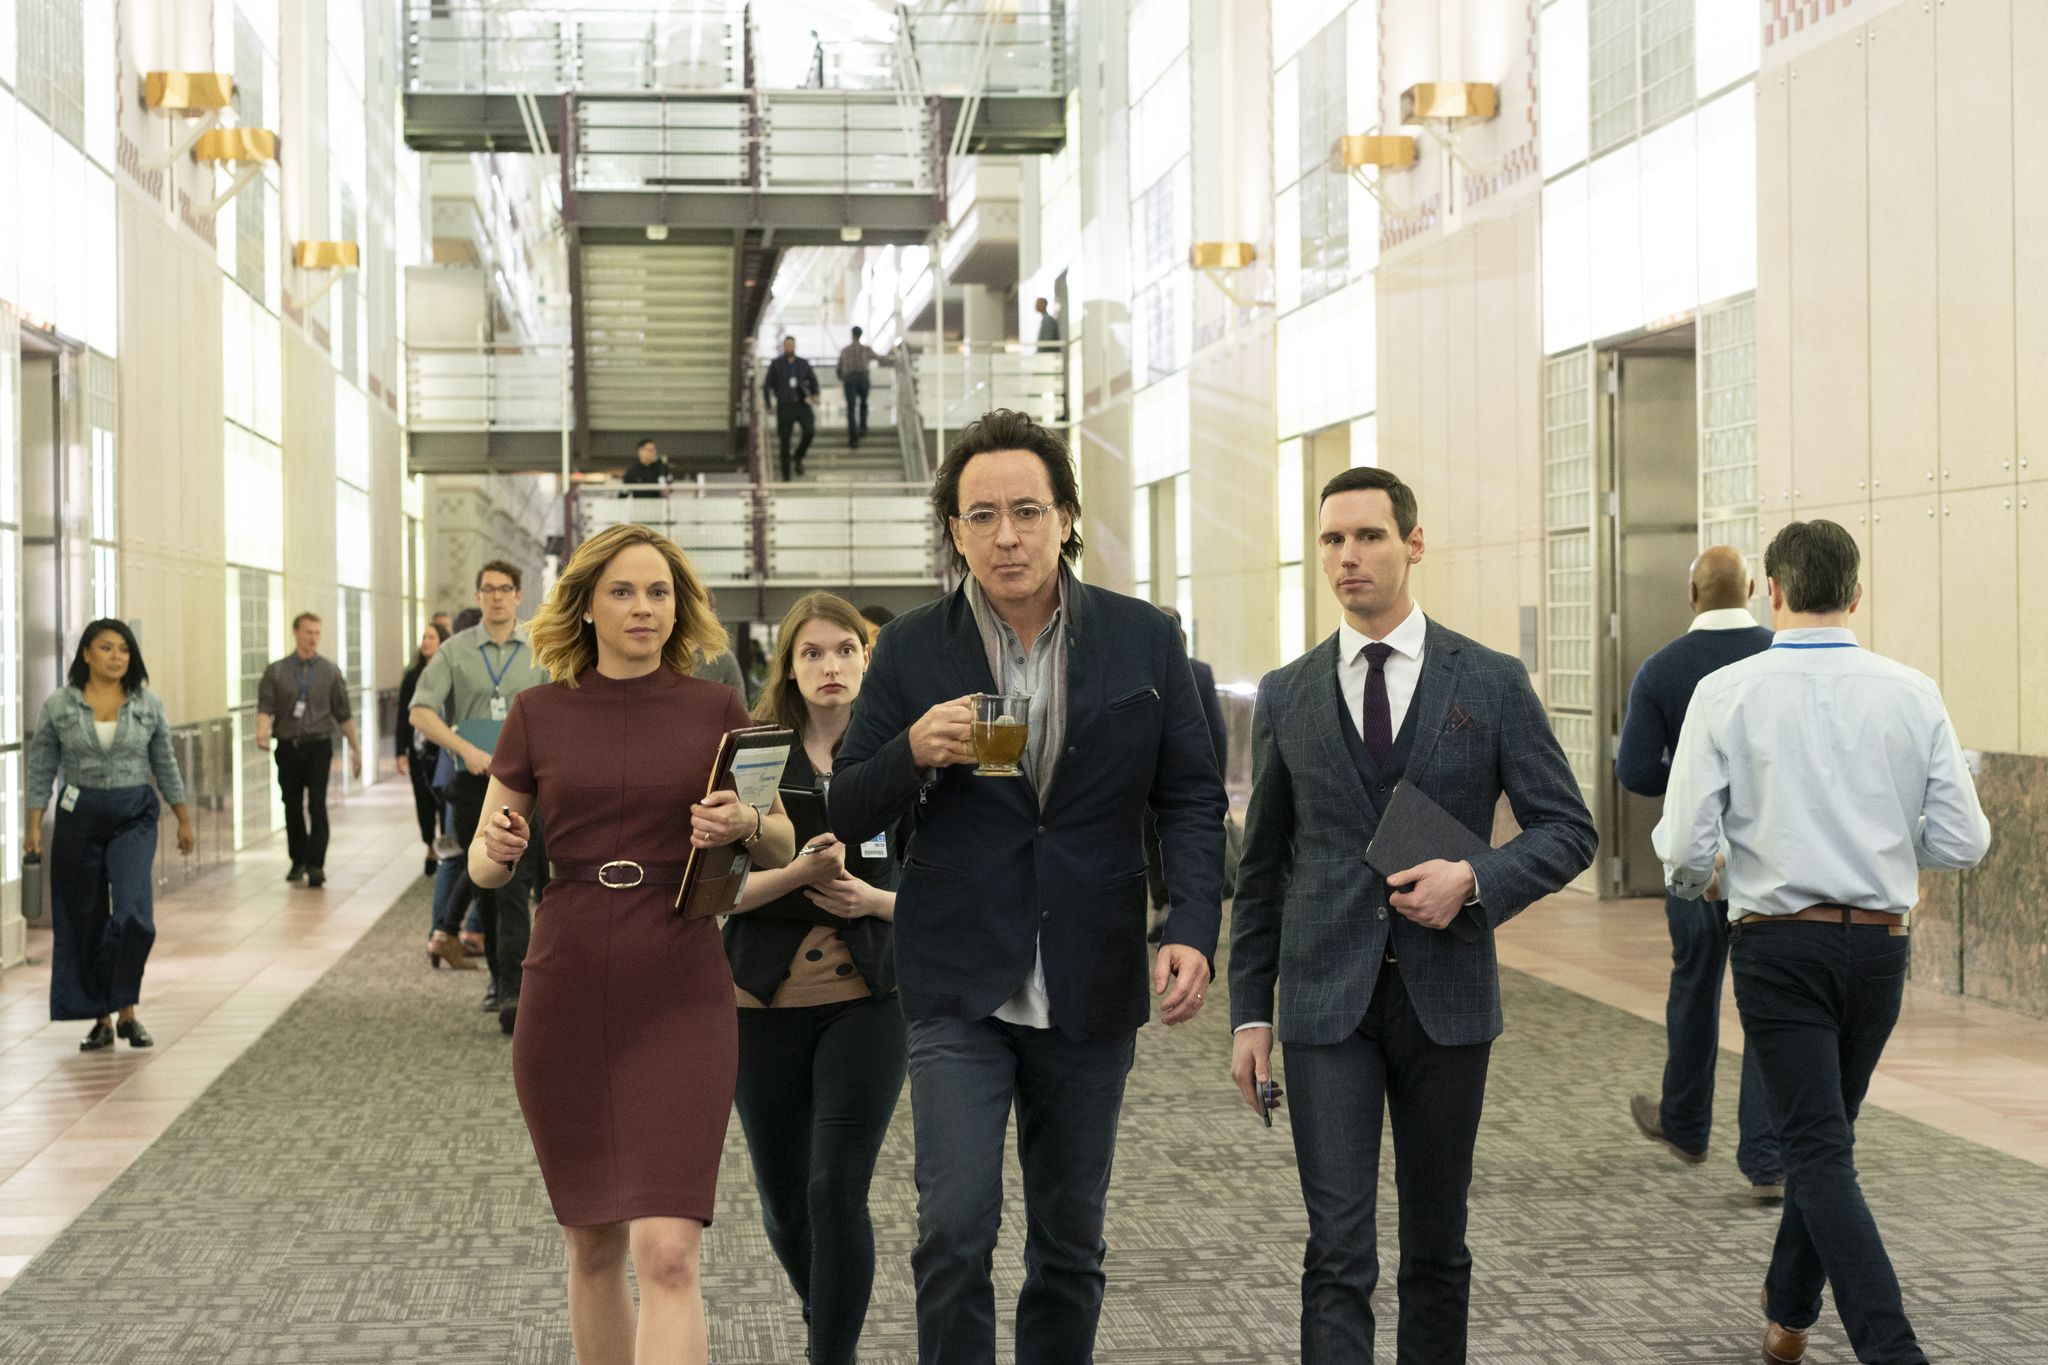 John Cusack (centre holding glass) and Cory Michael Smith (right wearing tie) on Utopia. (Photo: Elizabeth Morris/Amazon Prime Video)